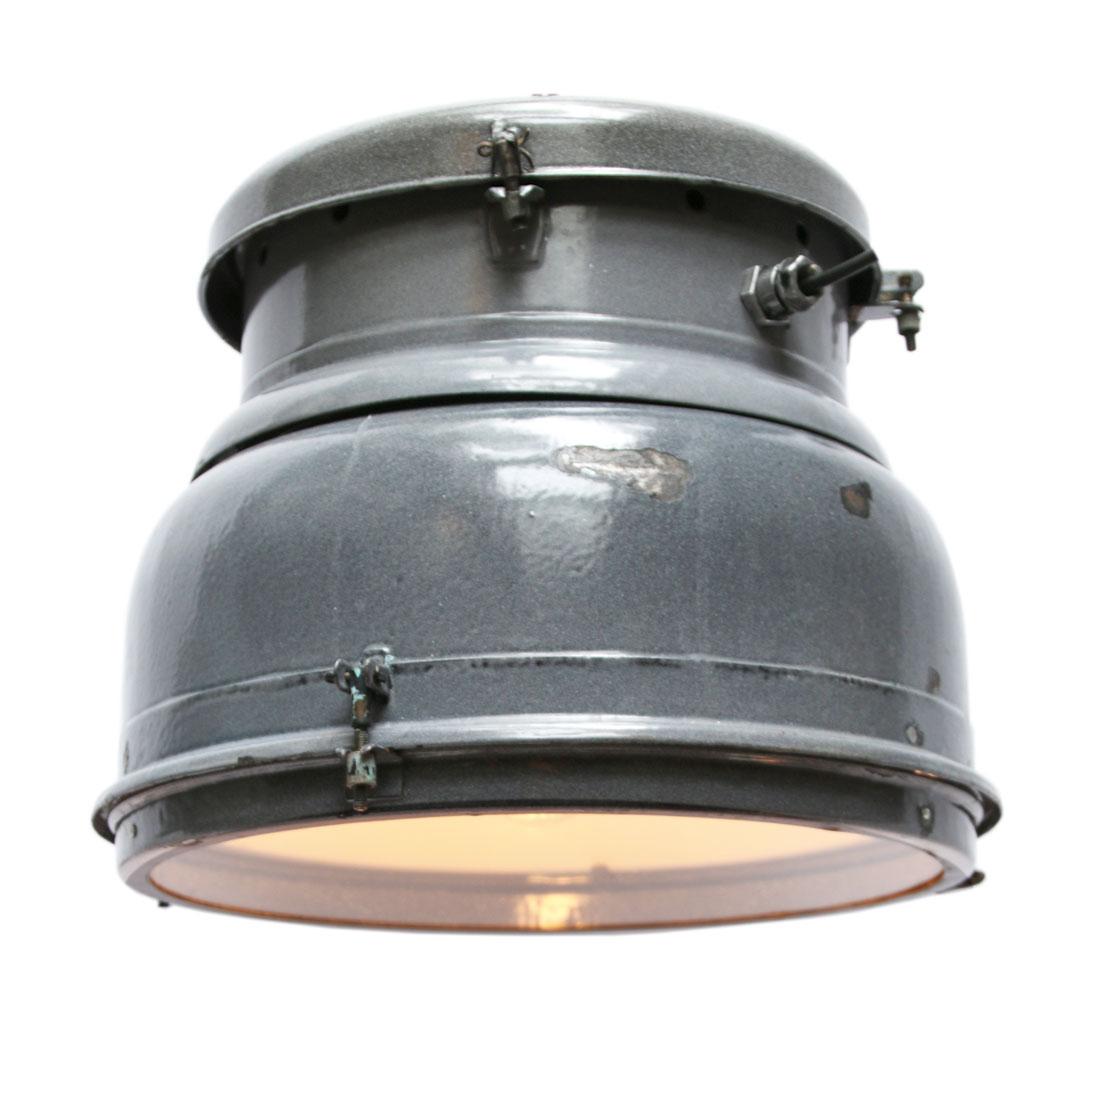 Classic European vintage industrial lamp. Very rare early model.
Gray enamel with white interior. 

Weight: 8.9 kg / 19.6 lb.

Priced per individual item. All lamps have been made suitable by international standards for incandescent light bulbs,